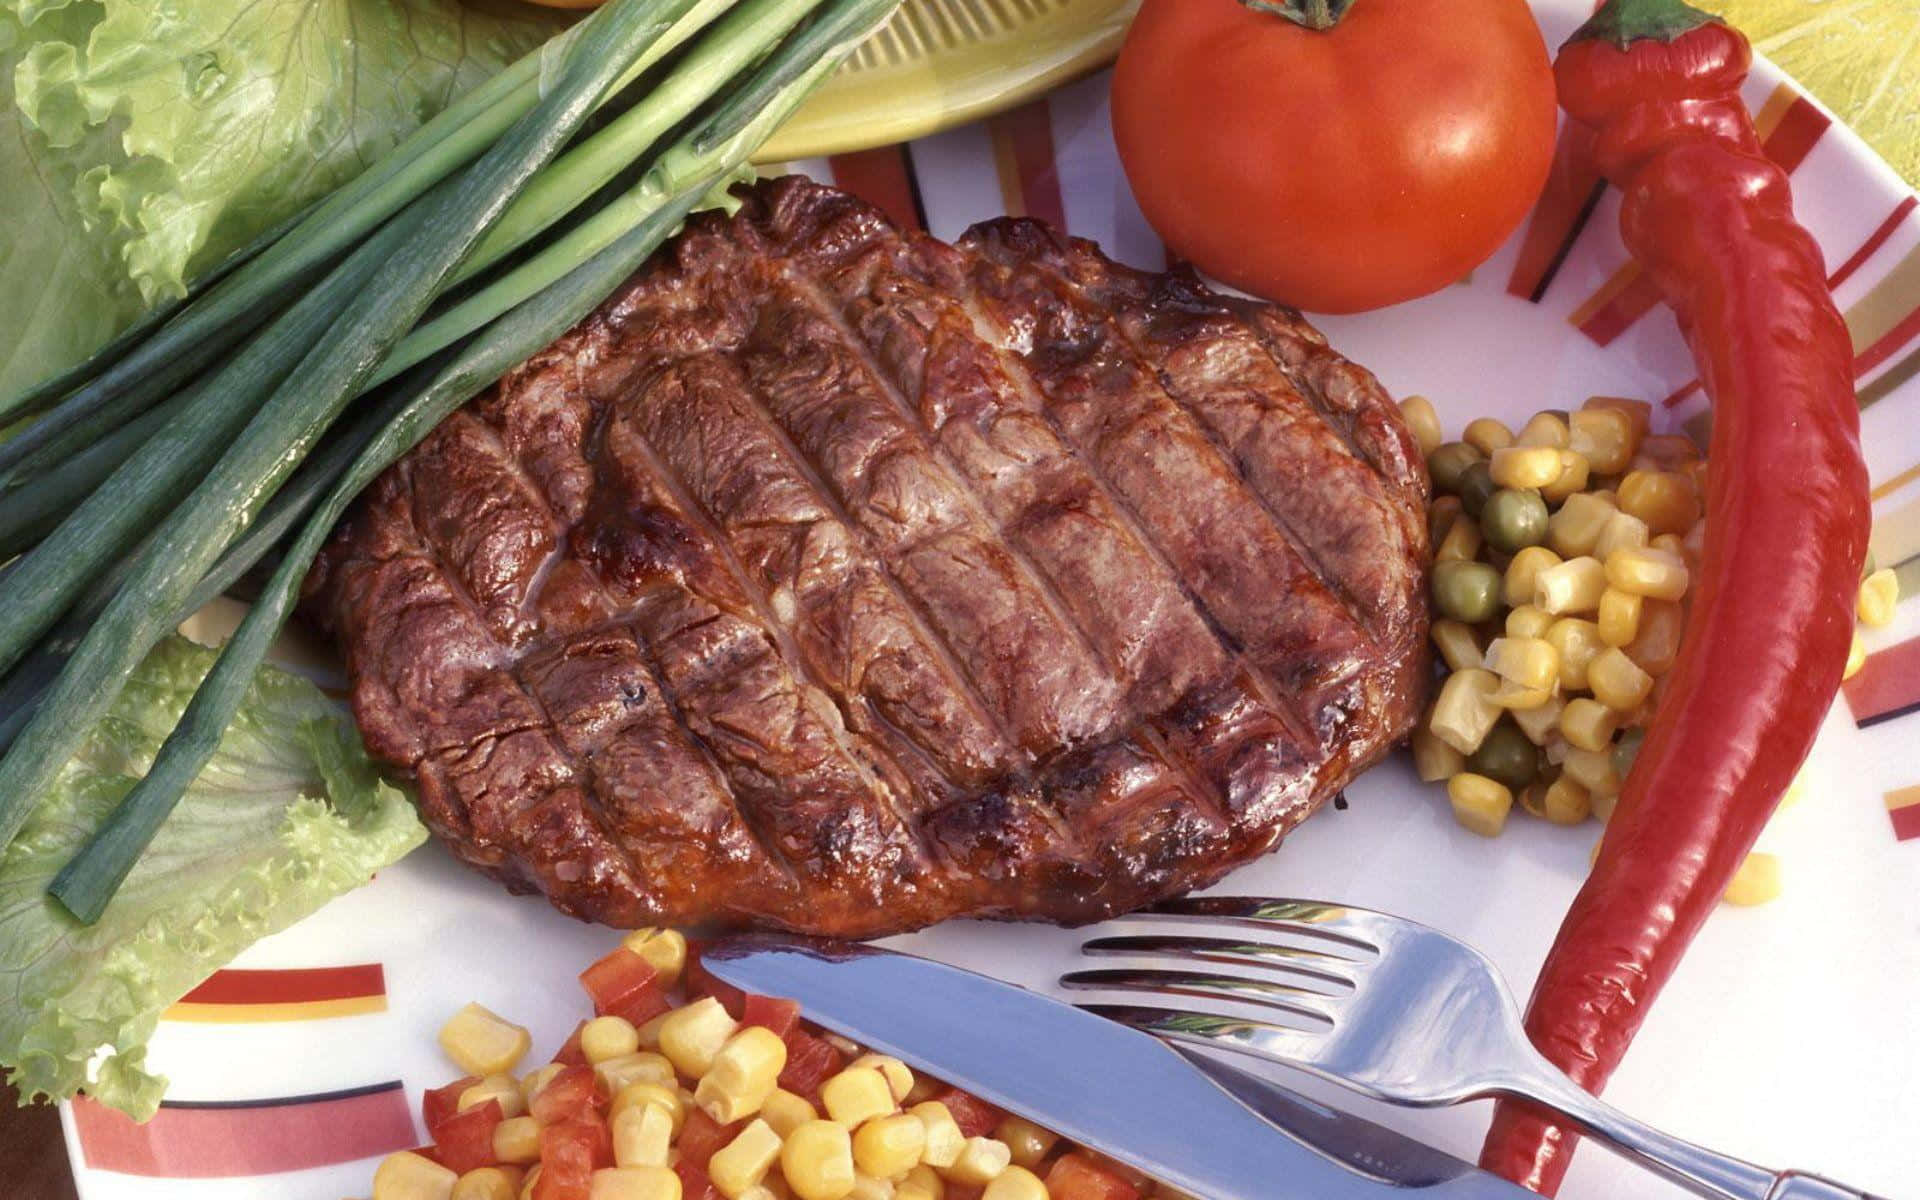 A Plate With Steak, Corn, Tomatoes And Vegetables